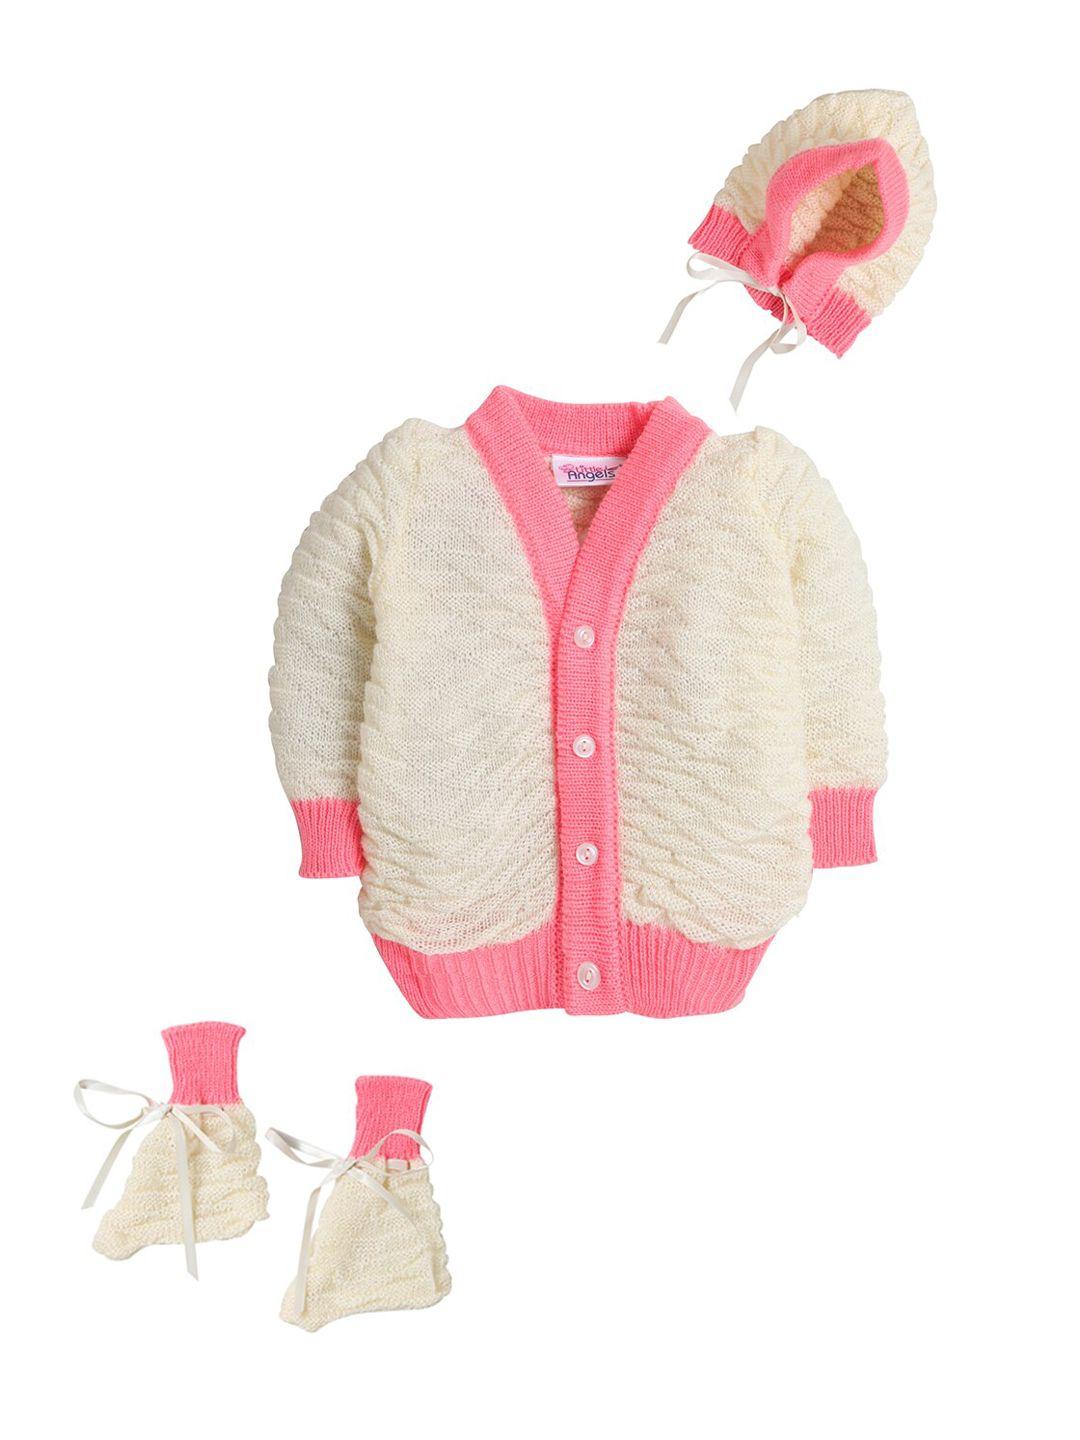 little angels unisex kids cream-coloured & pink cable knit cardigan matching cap and socks